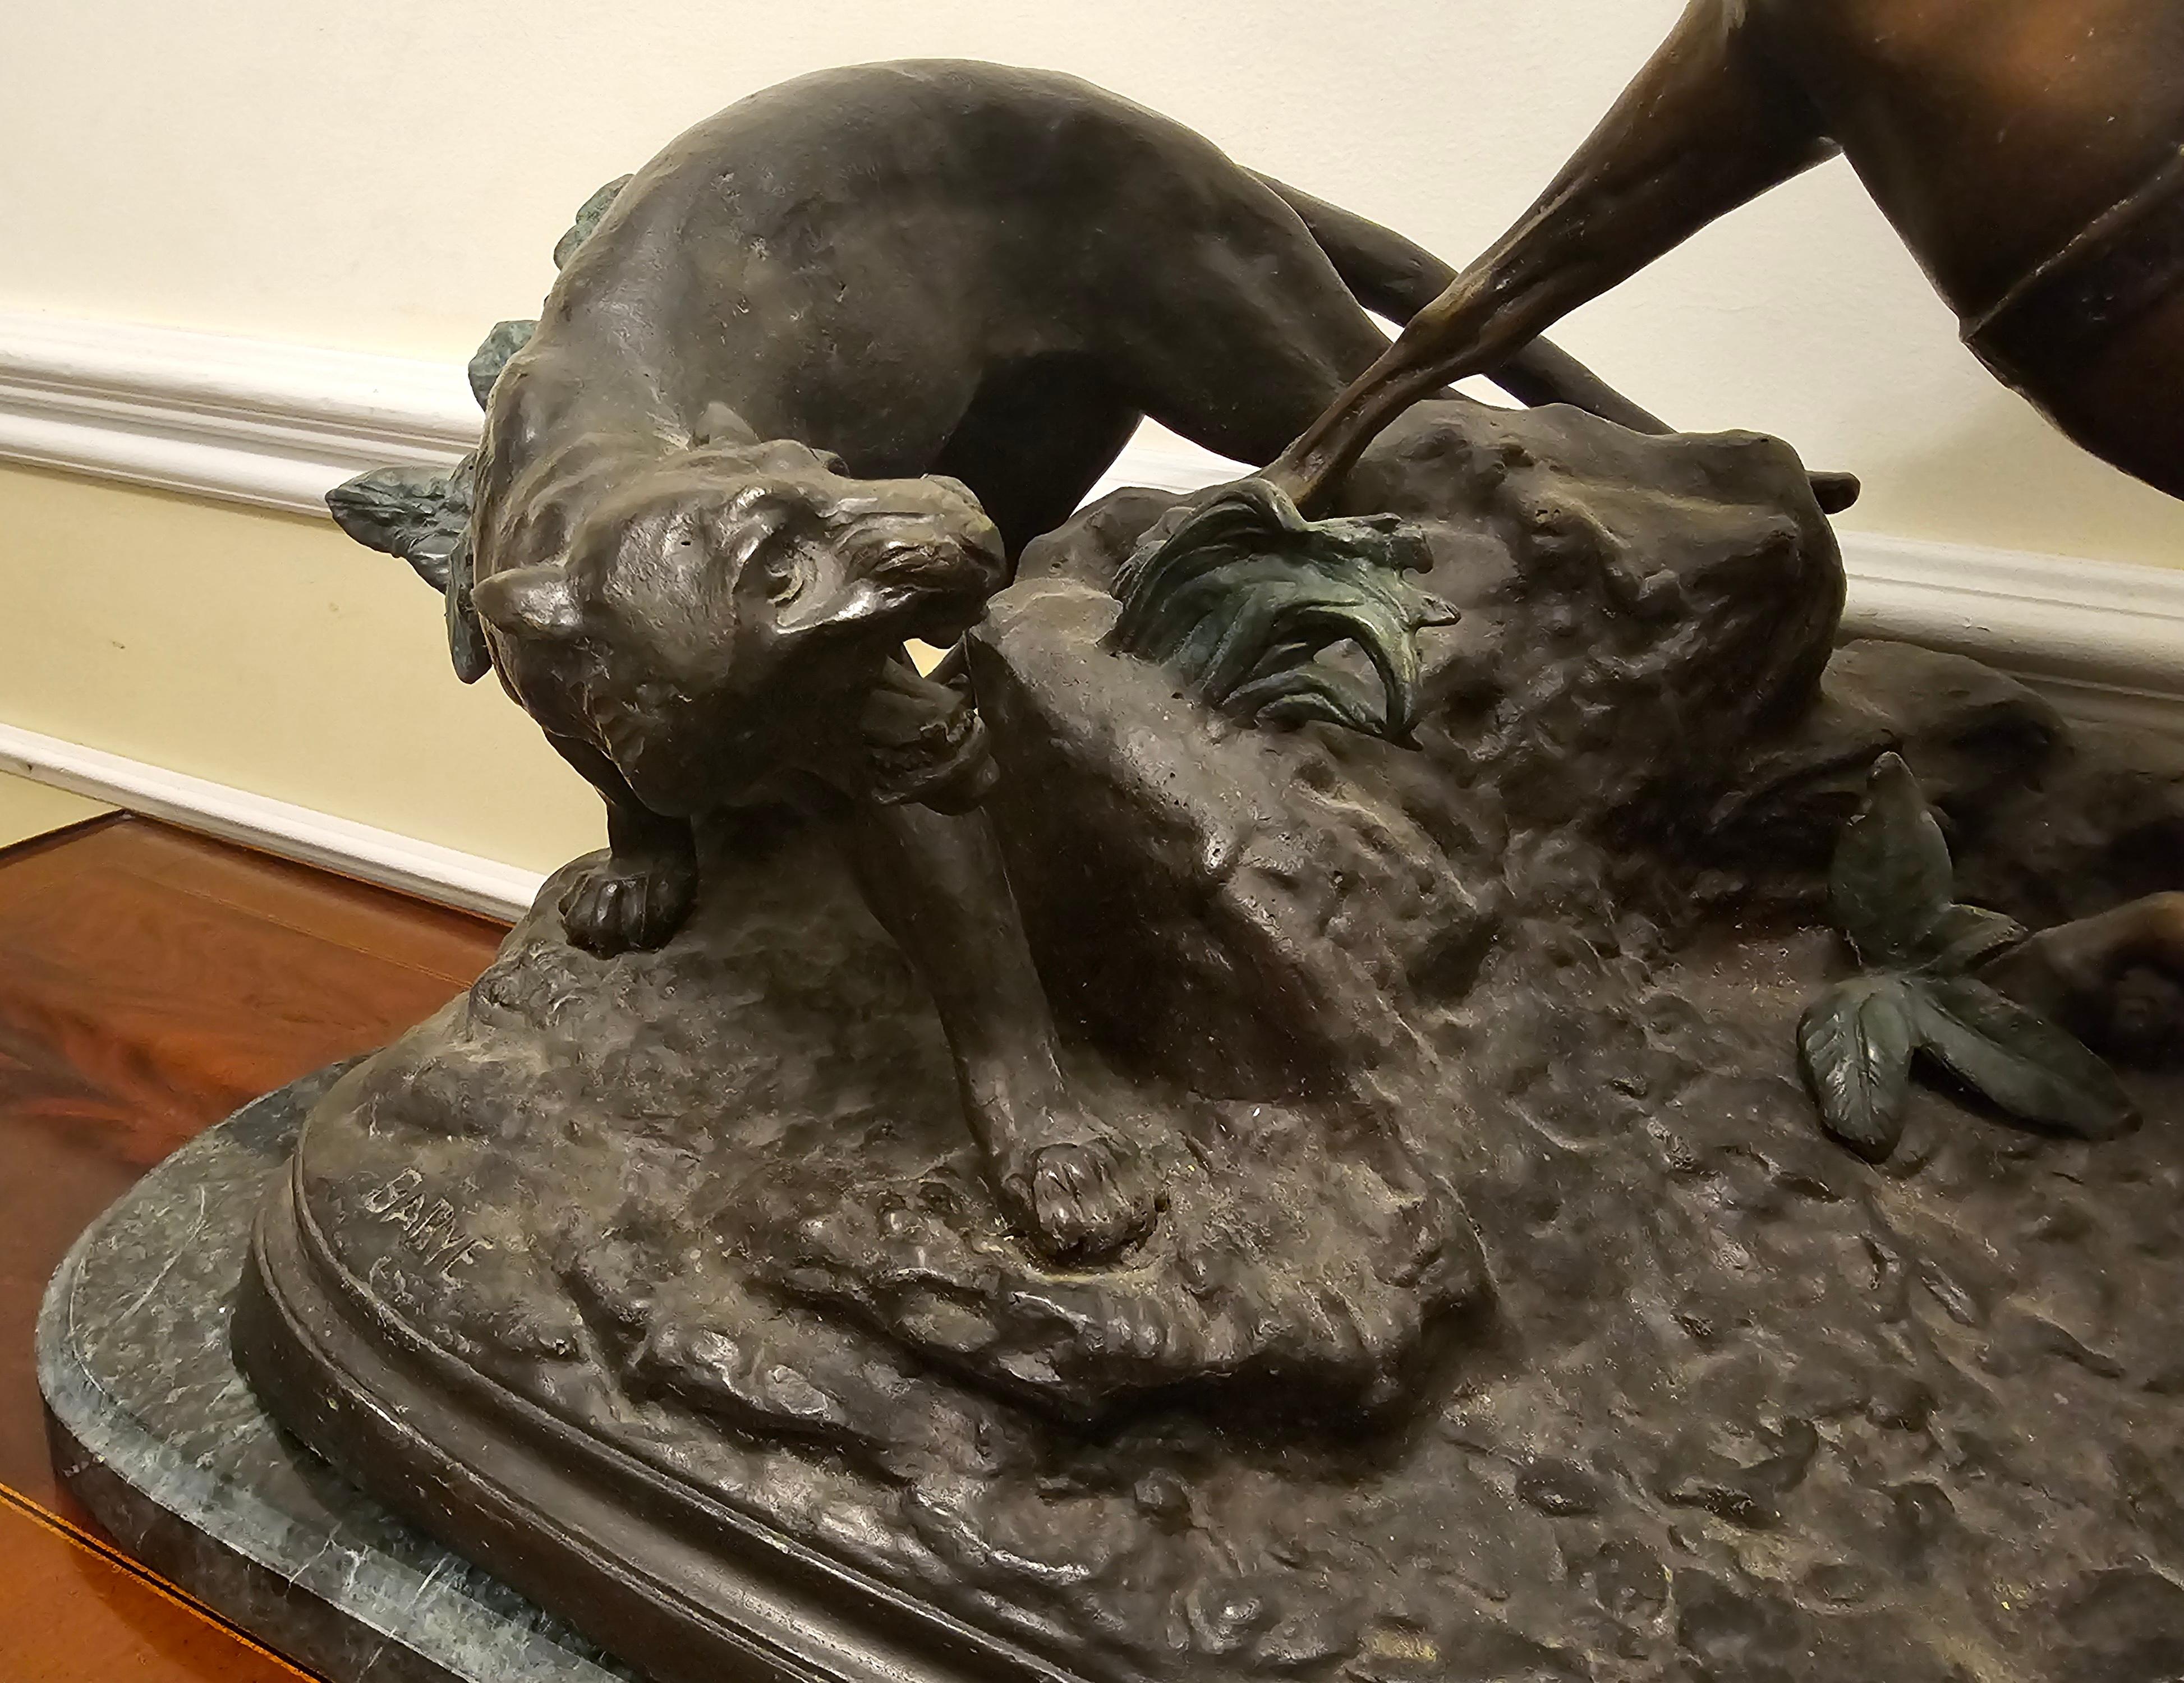 After Antoine-Louis Barye (French 1796 - 1875), Cougar Attack, Recast Bronze Figural Group On Marble Plinth.
Ever seen a piece of art that instantly transports you to another time and place? Antoine Barye's 